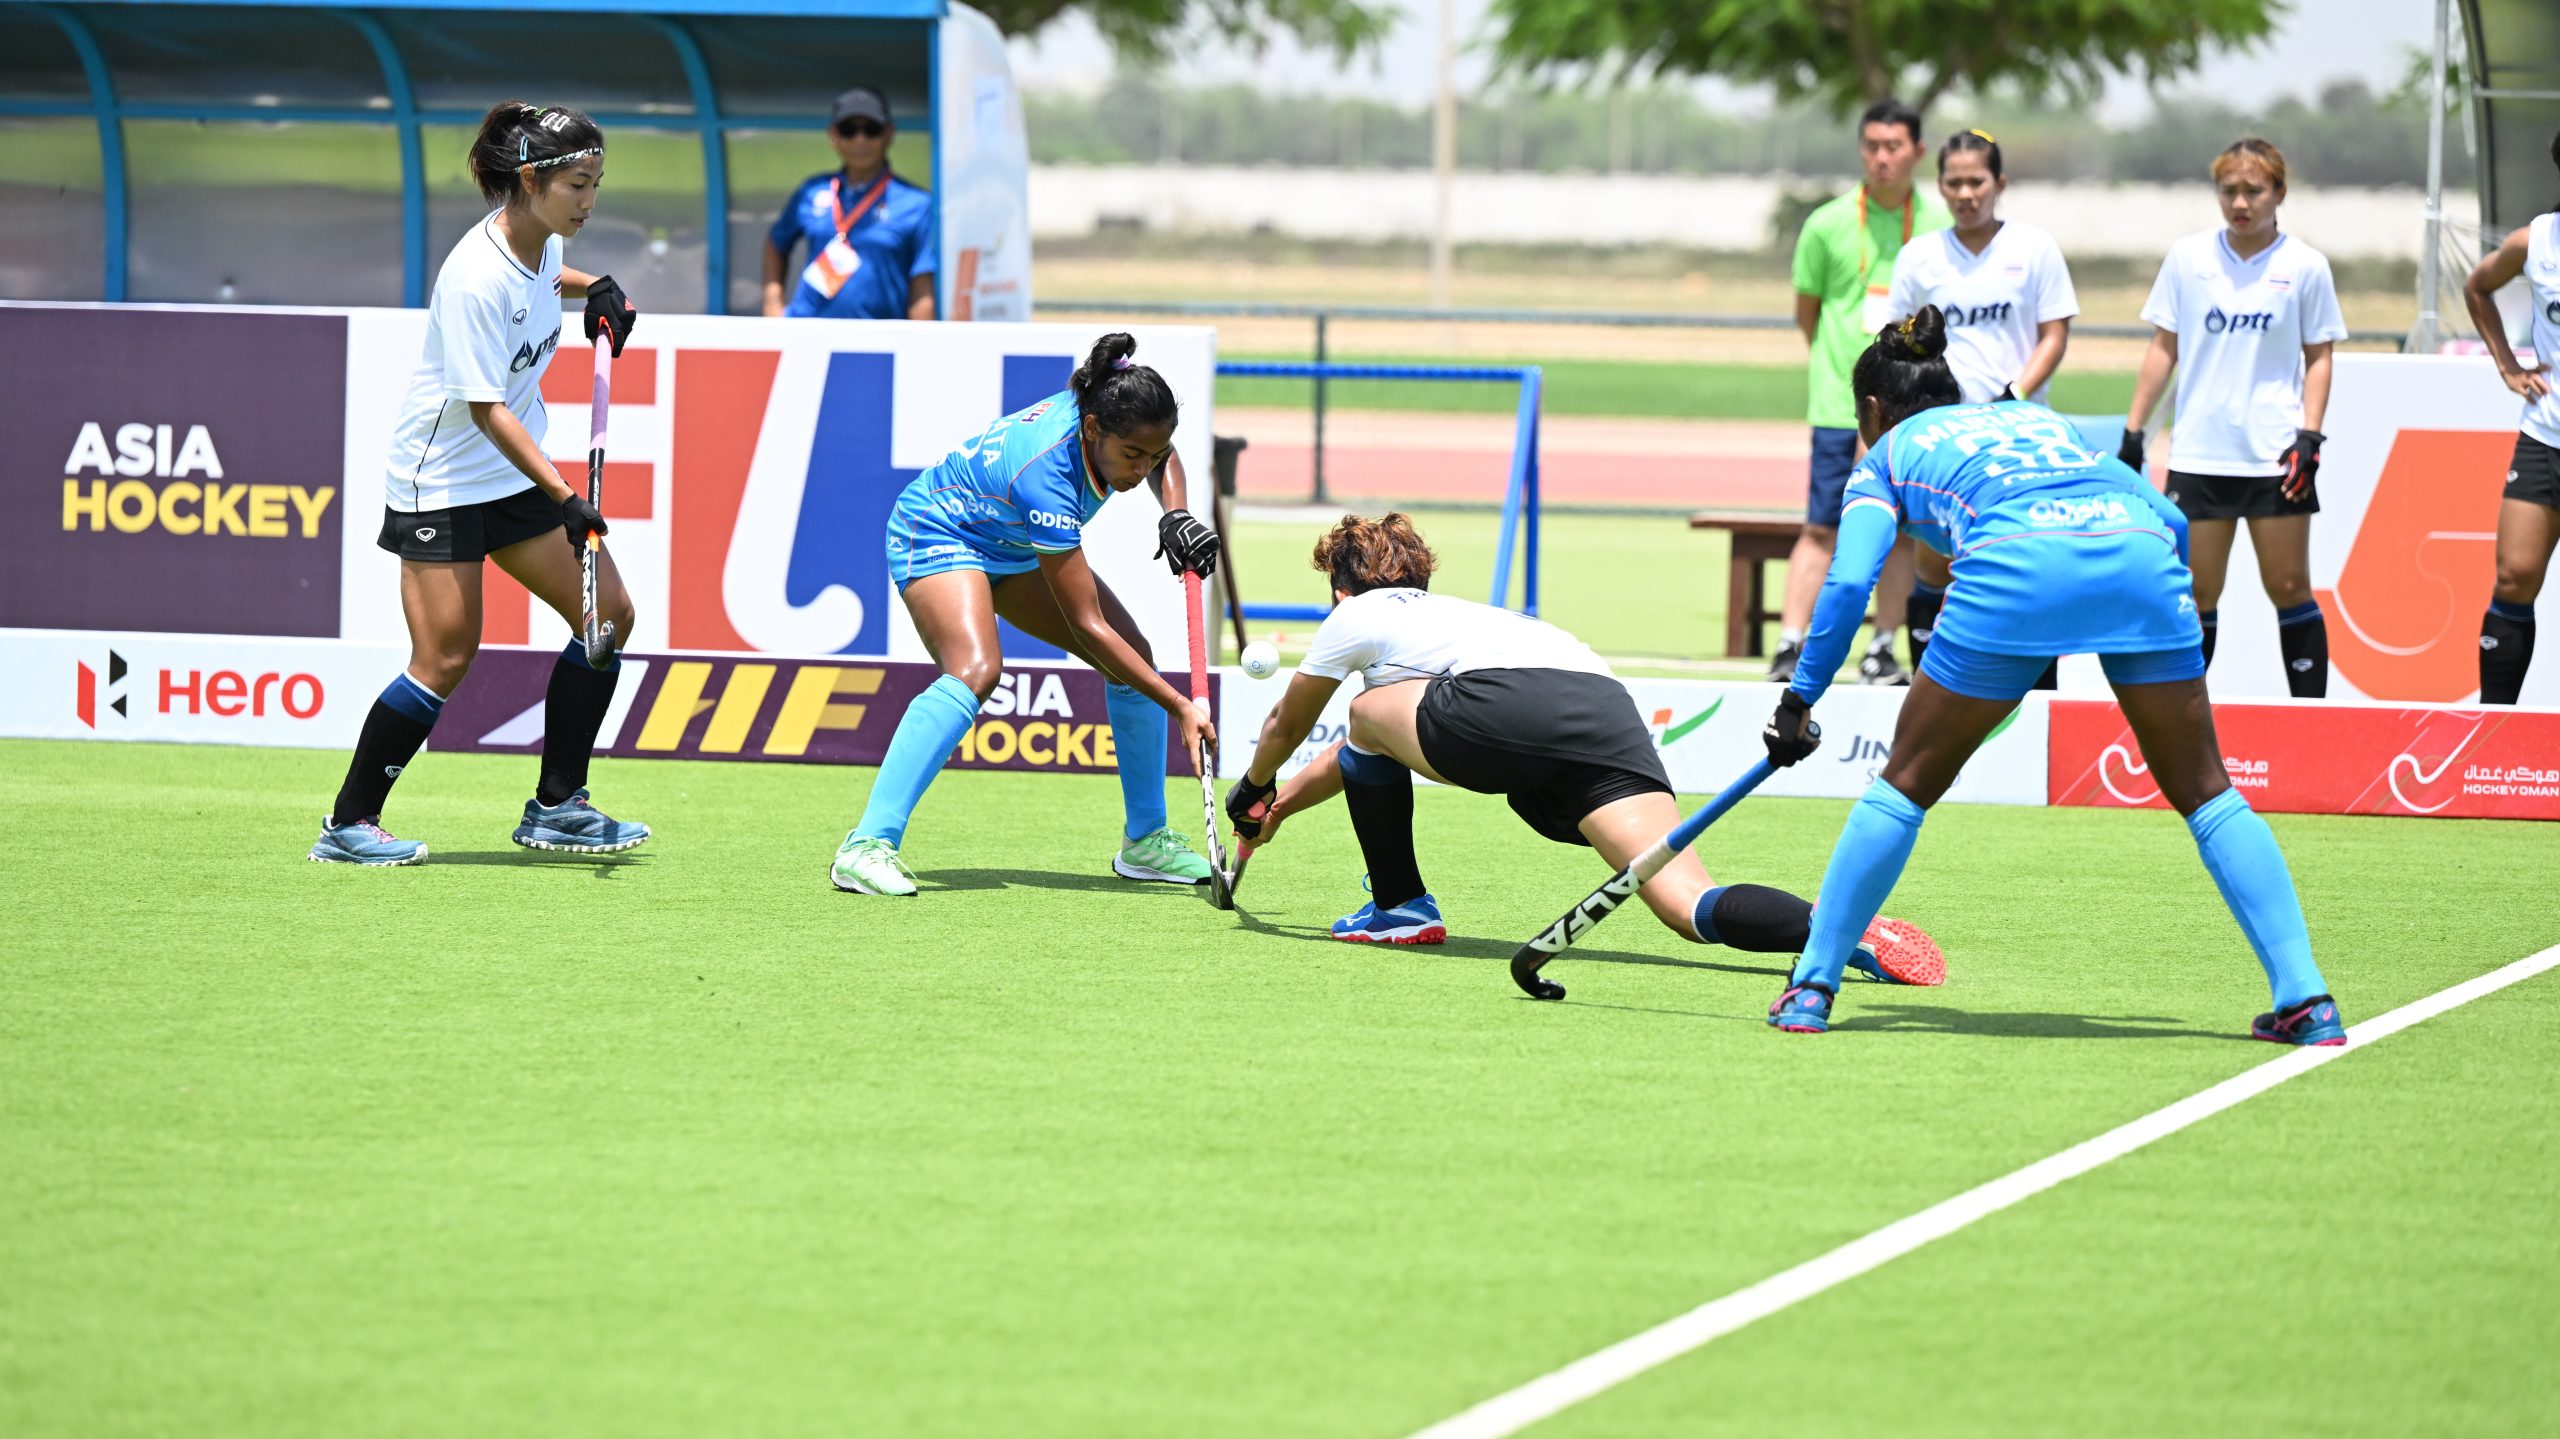 Action from the match between India and Thailand 1 scaled